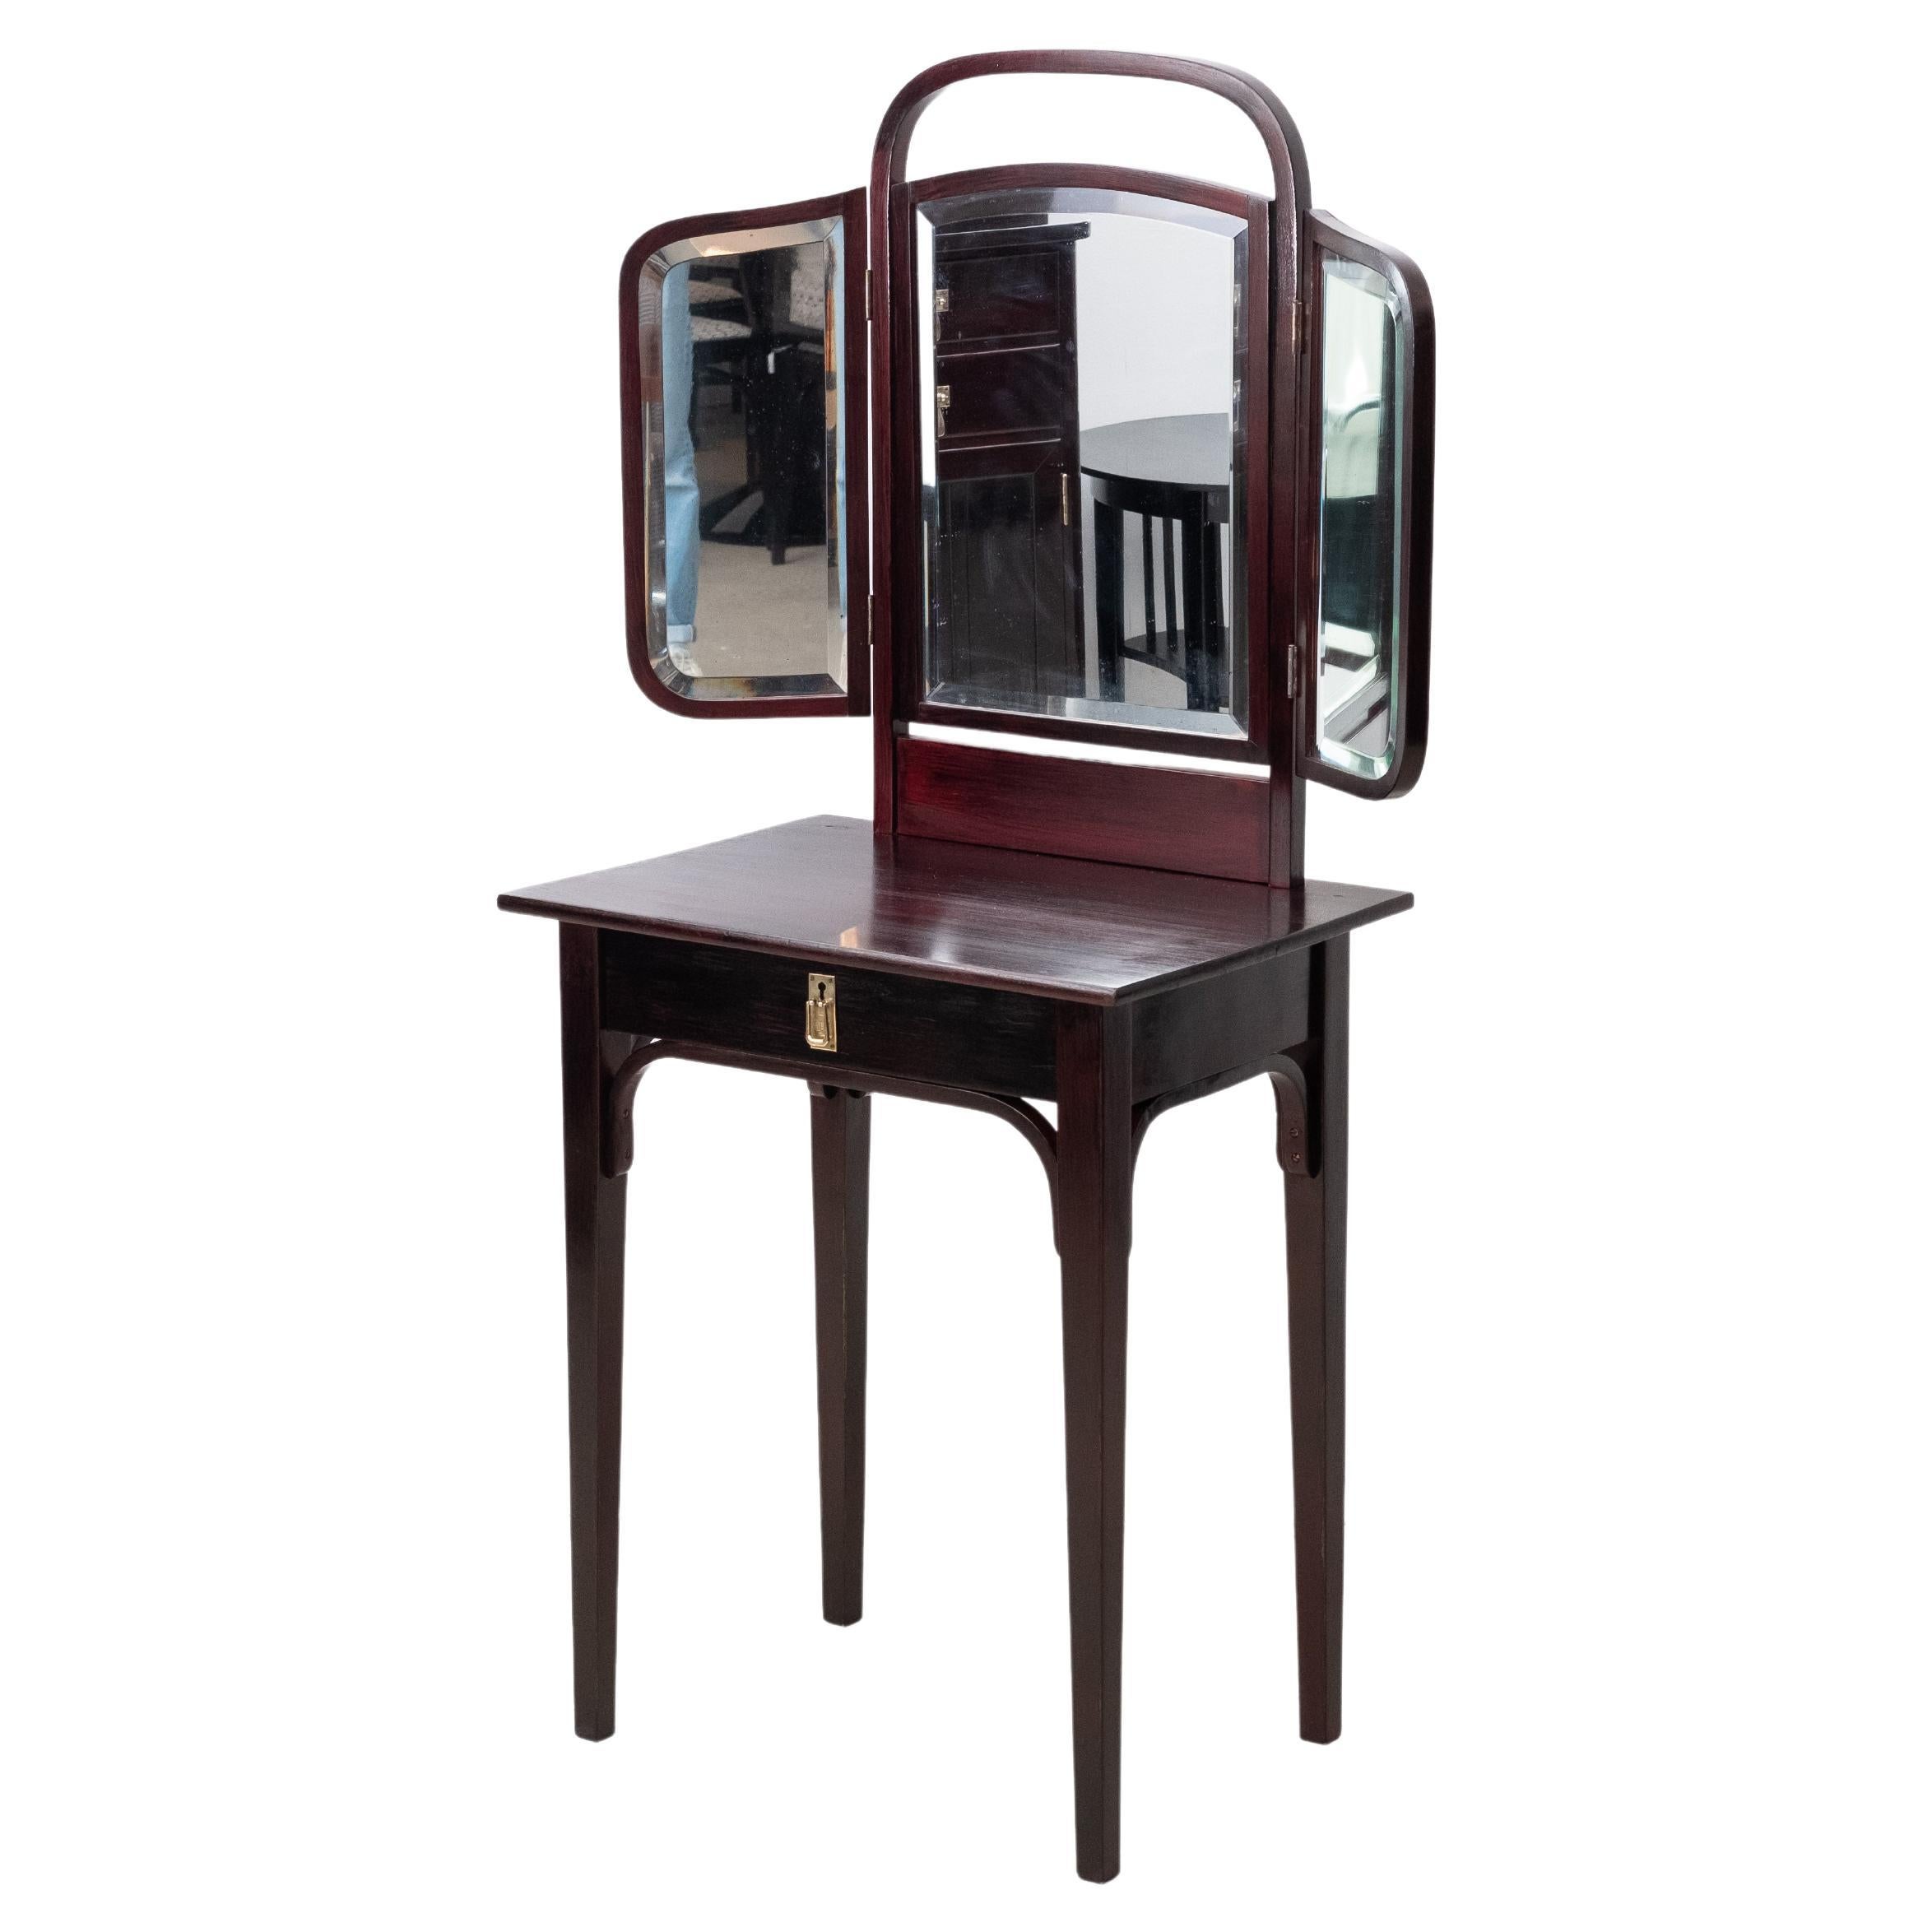 Art Nouveau Dressingtable from Thonet Brothers, Model 23045 (Vienna, 1910)